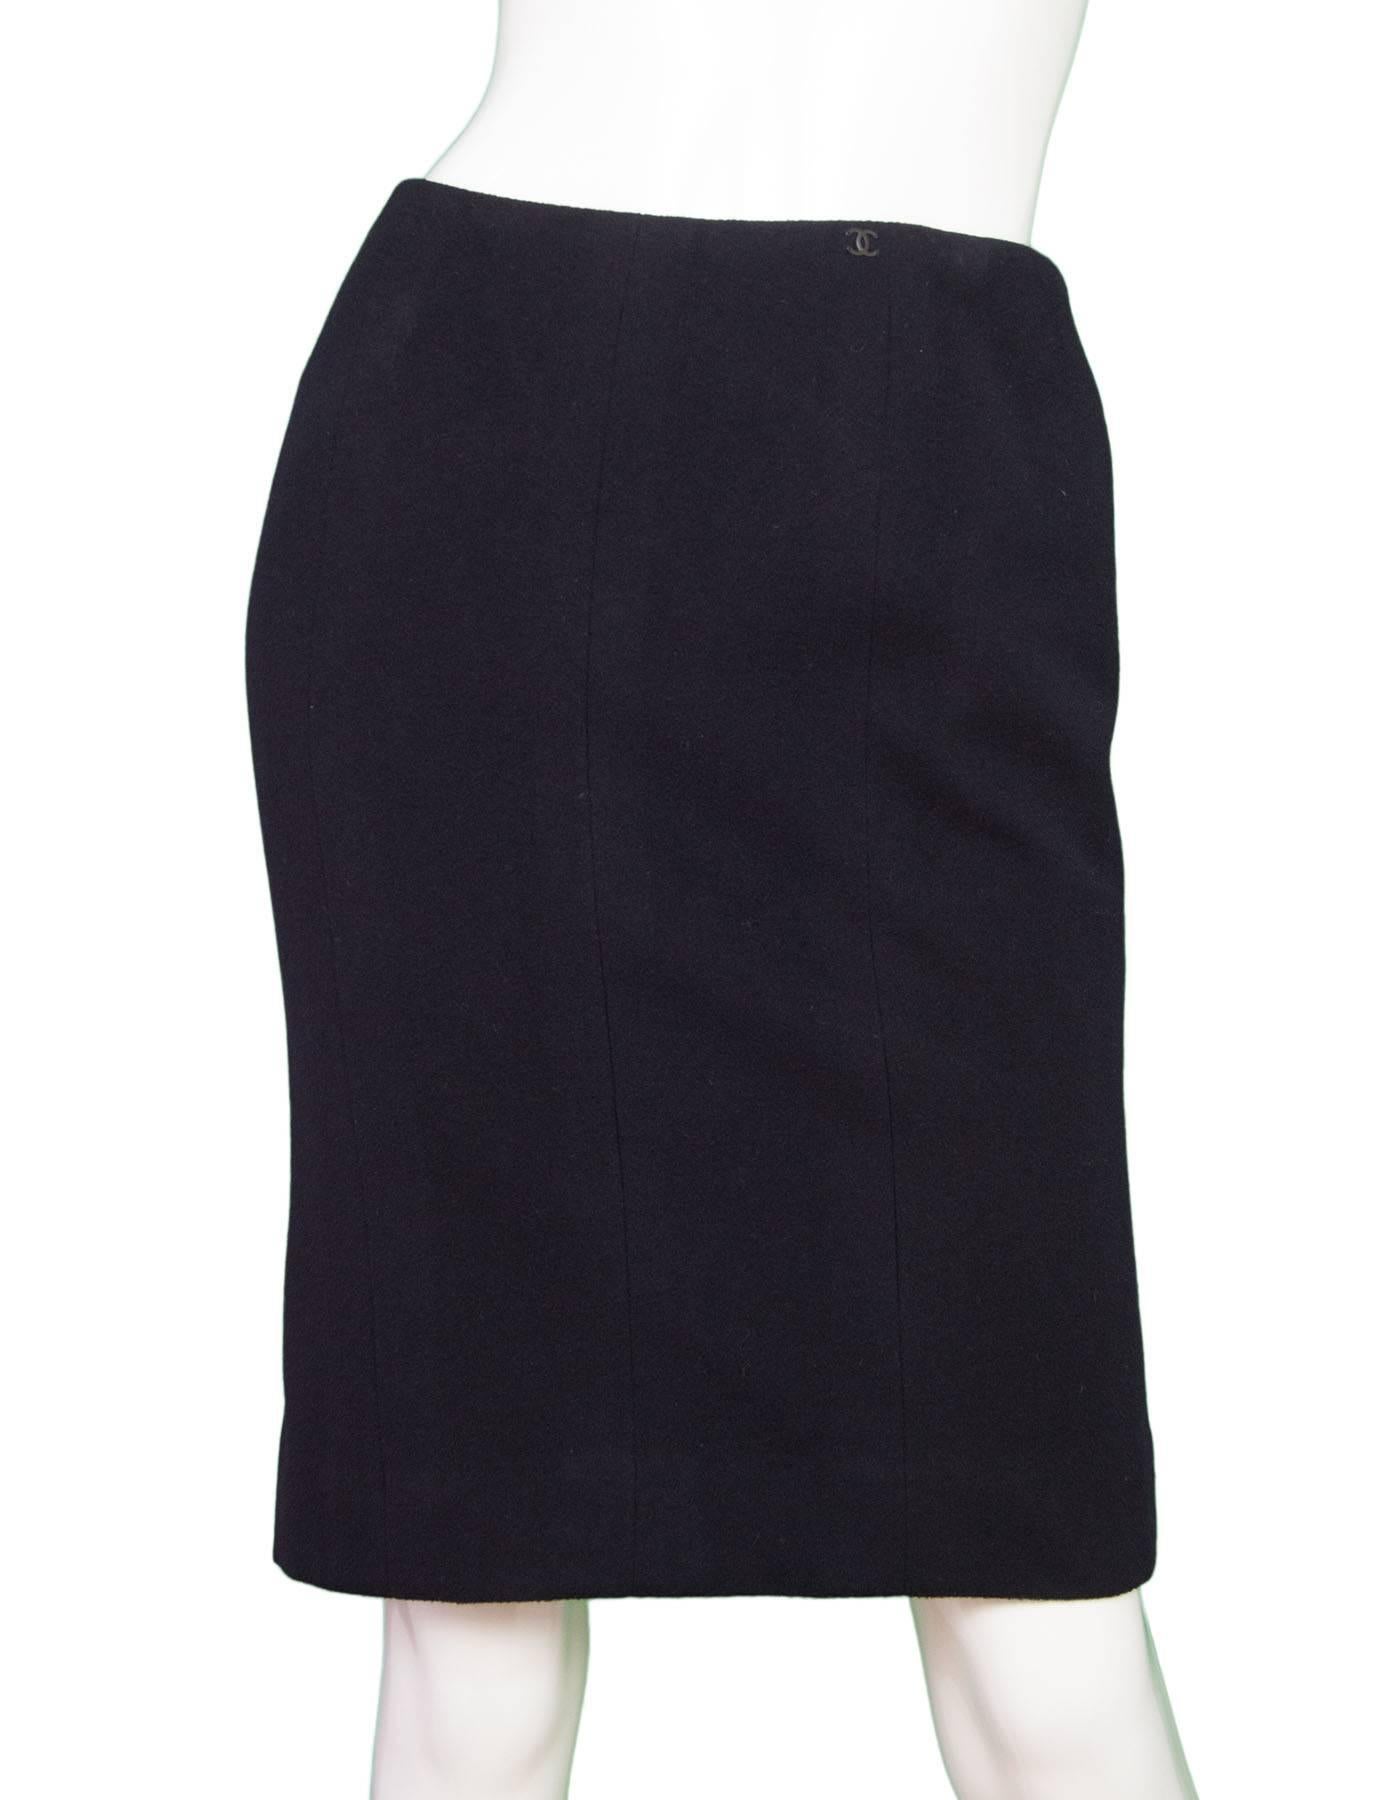 Chanel Black Cashmere Pencil Skirt 

Features small CC button stitched at left hip
Made In: France
Year of Production: 2002
Color: Black
Composition: 100% cashmere
Lining: Black, 95% silk, 5% spandex
Closure/Opening: Back center zipper